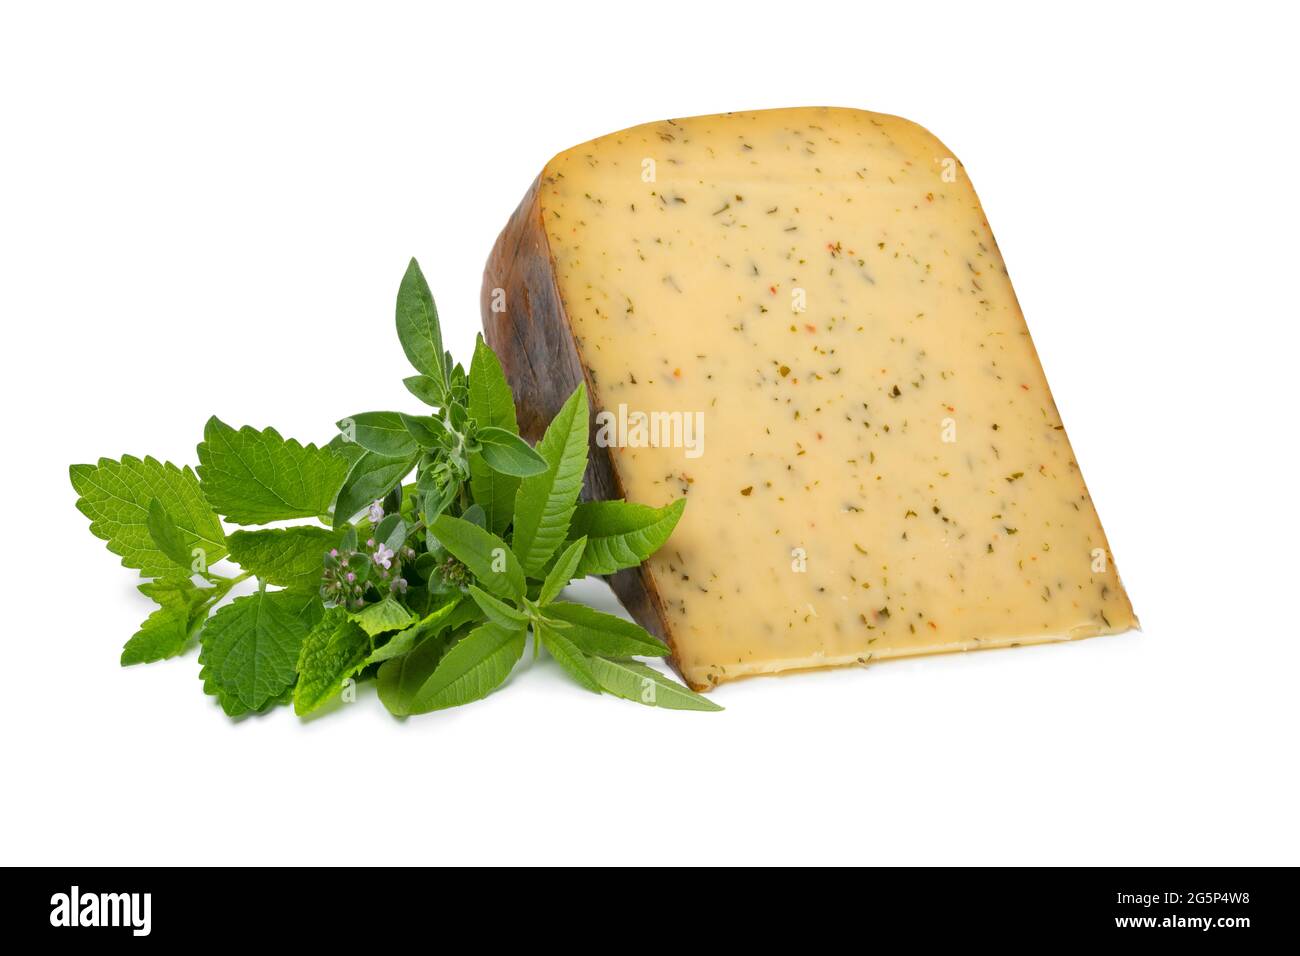 Wedge of Dutch herbal cheese and fresh green herbs isolated on white background Stock Photo